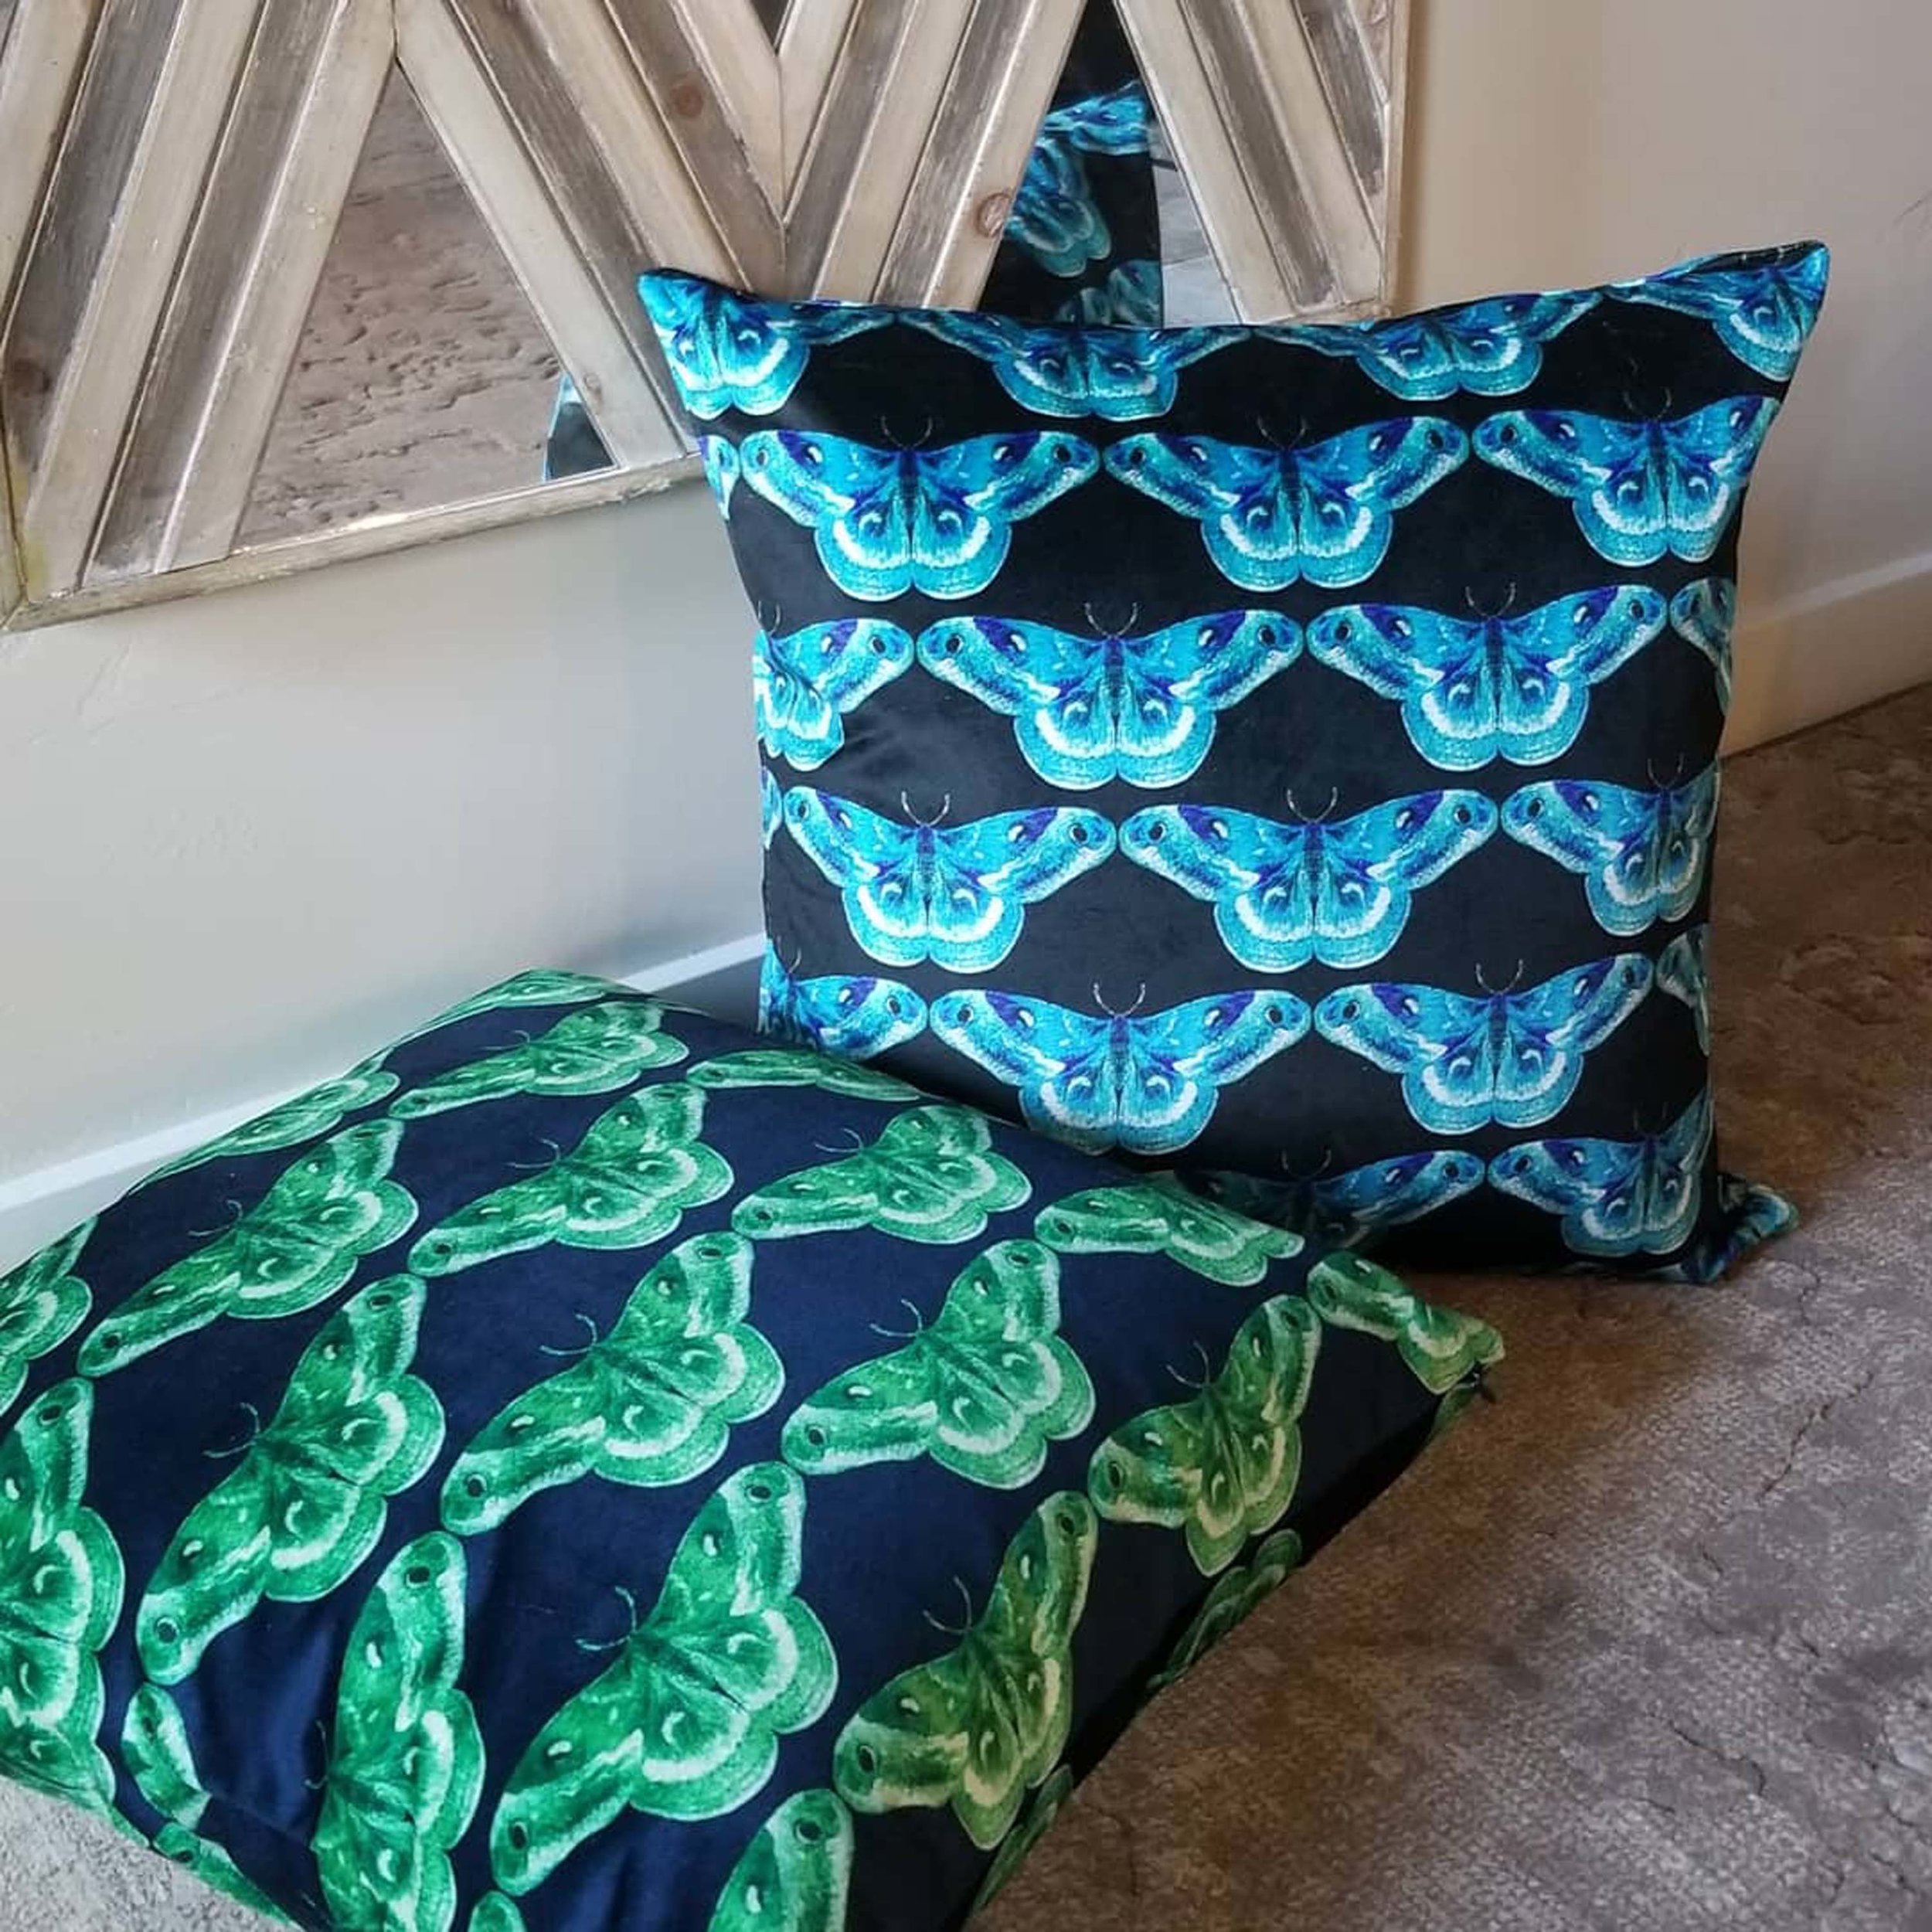 Set of black pillows with green and blue printed butterflies